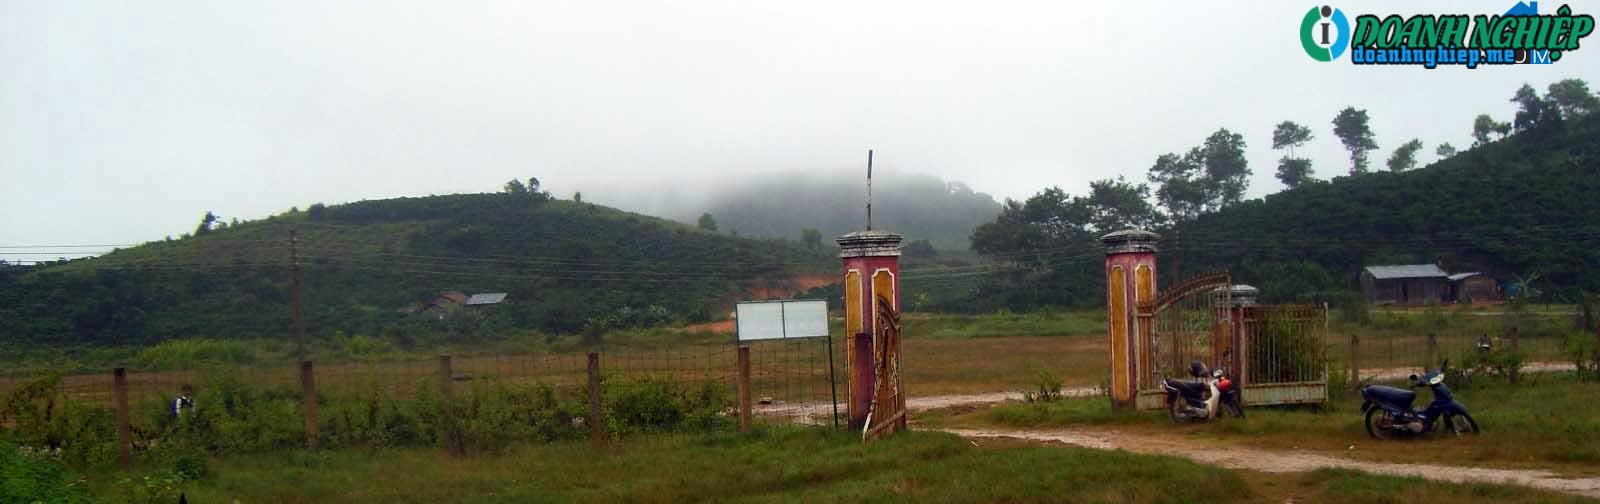 Image of List companies in Phi Lieng Commune- Dam Rong District- Lam Dong